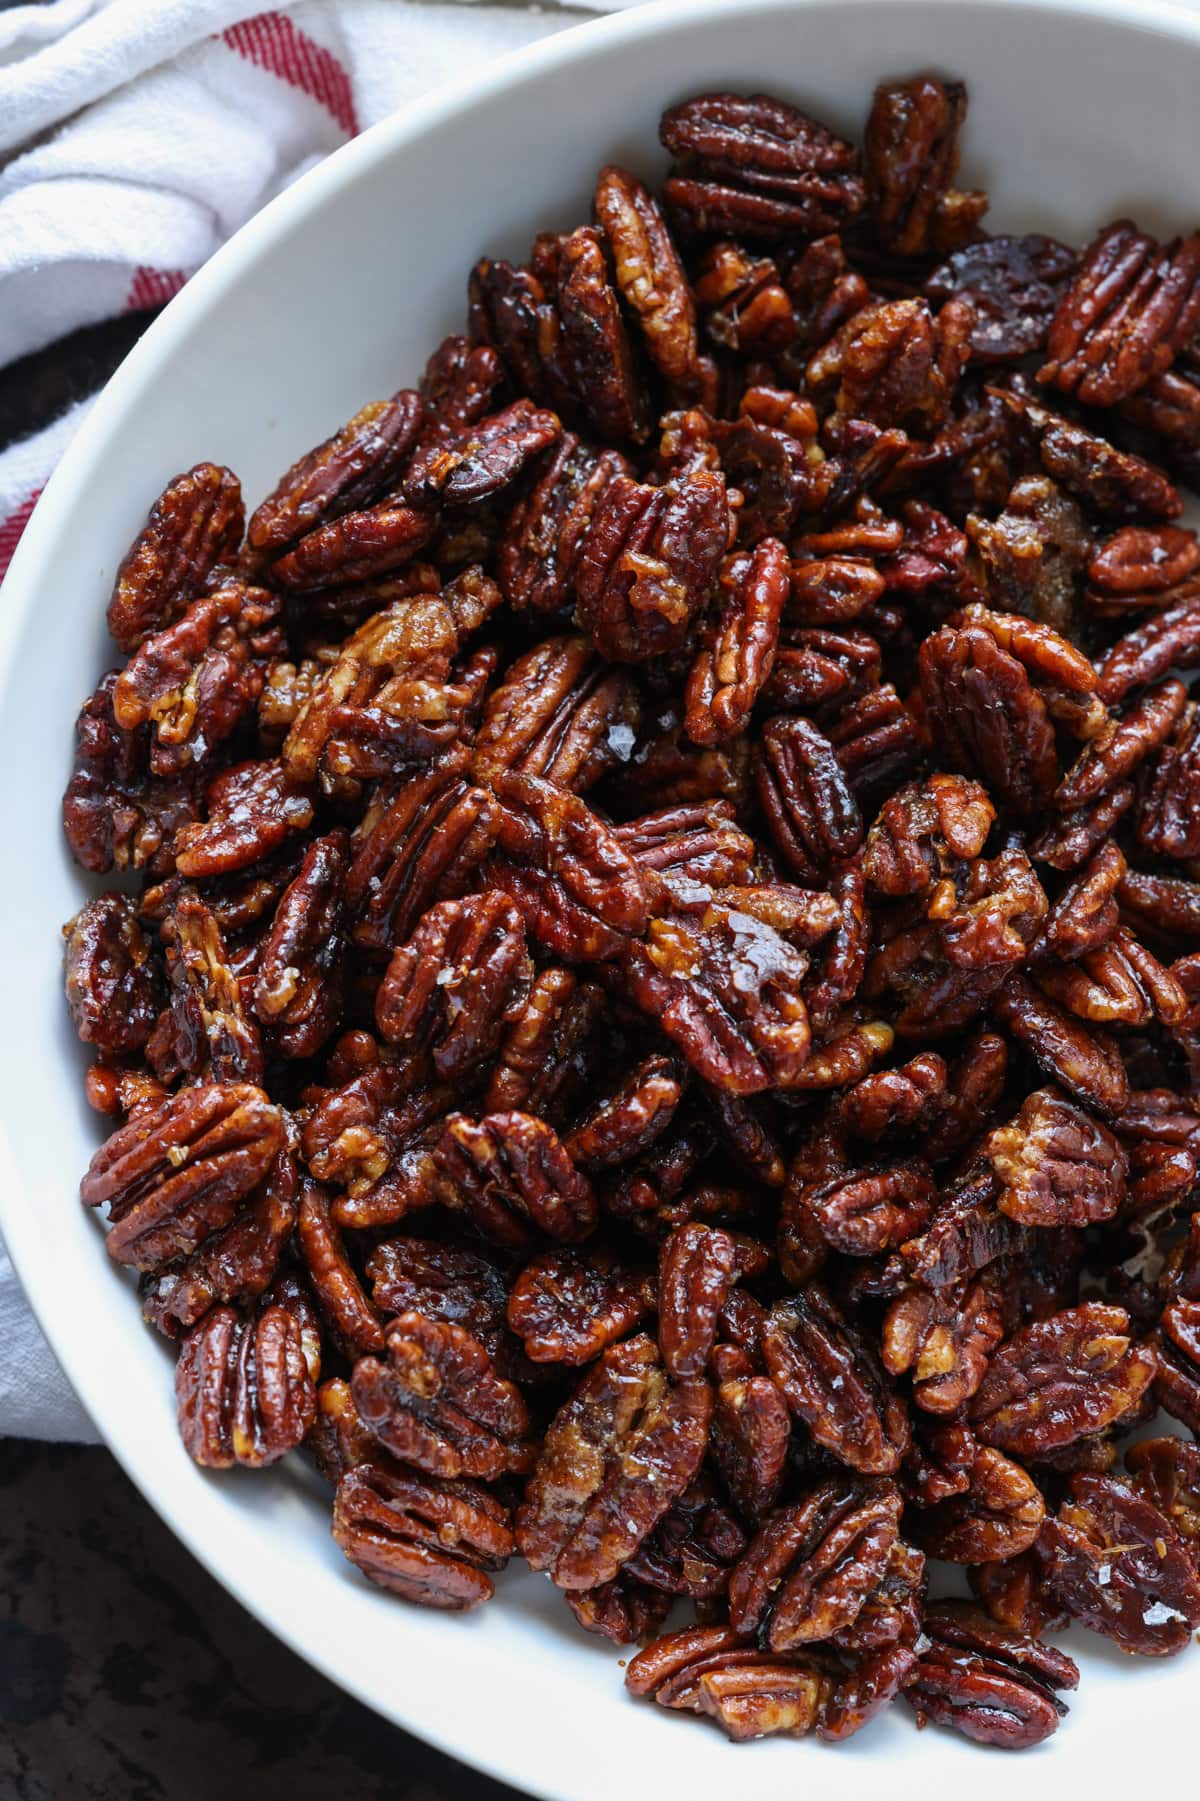 Overhead view of a bowl full of candied pecans.